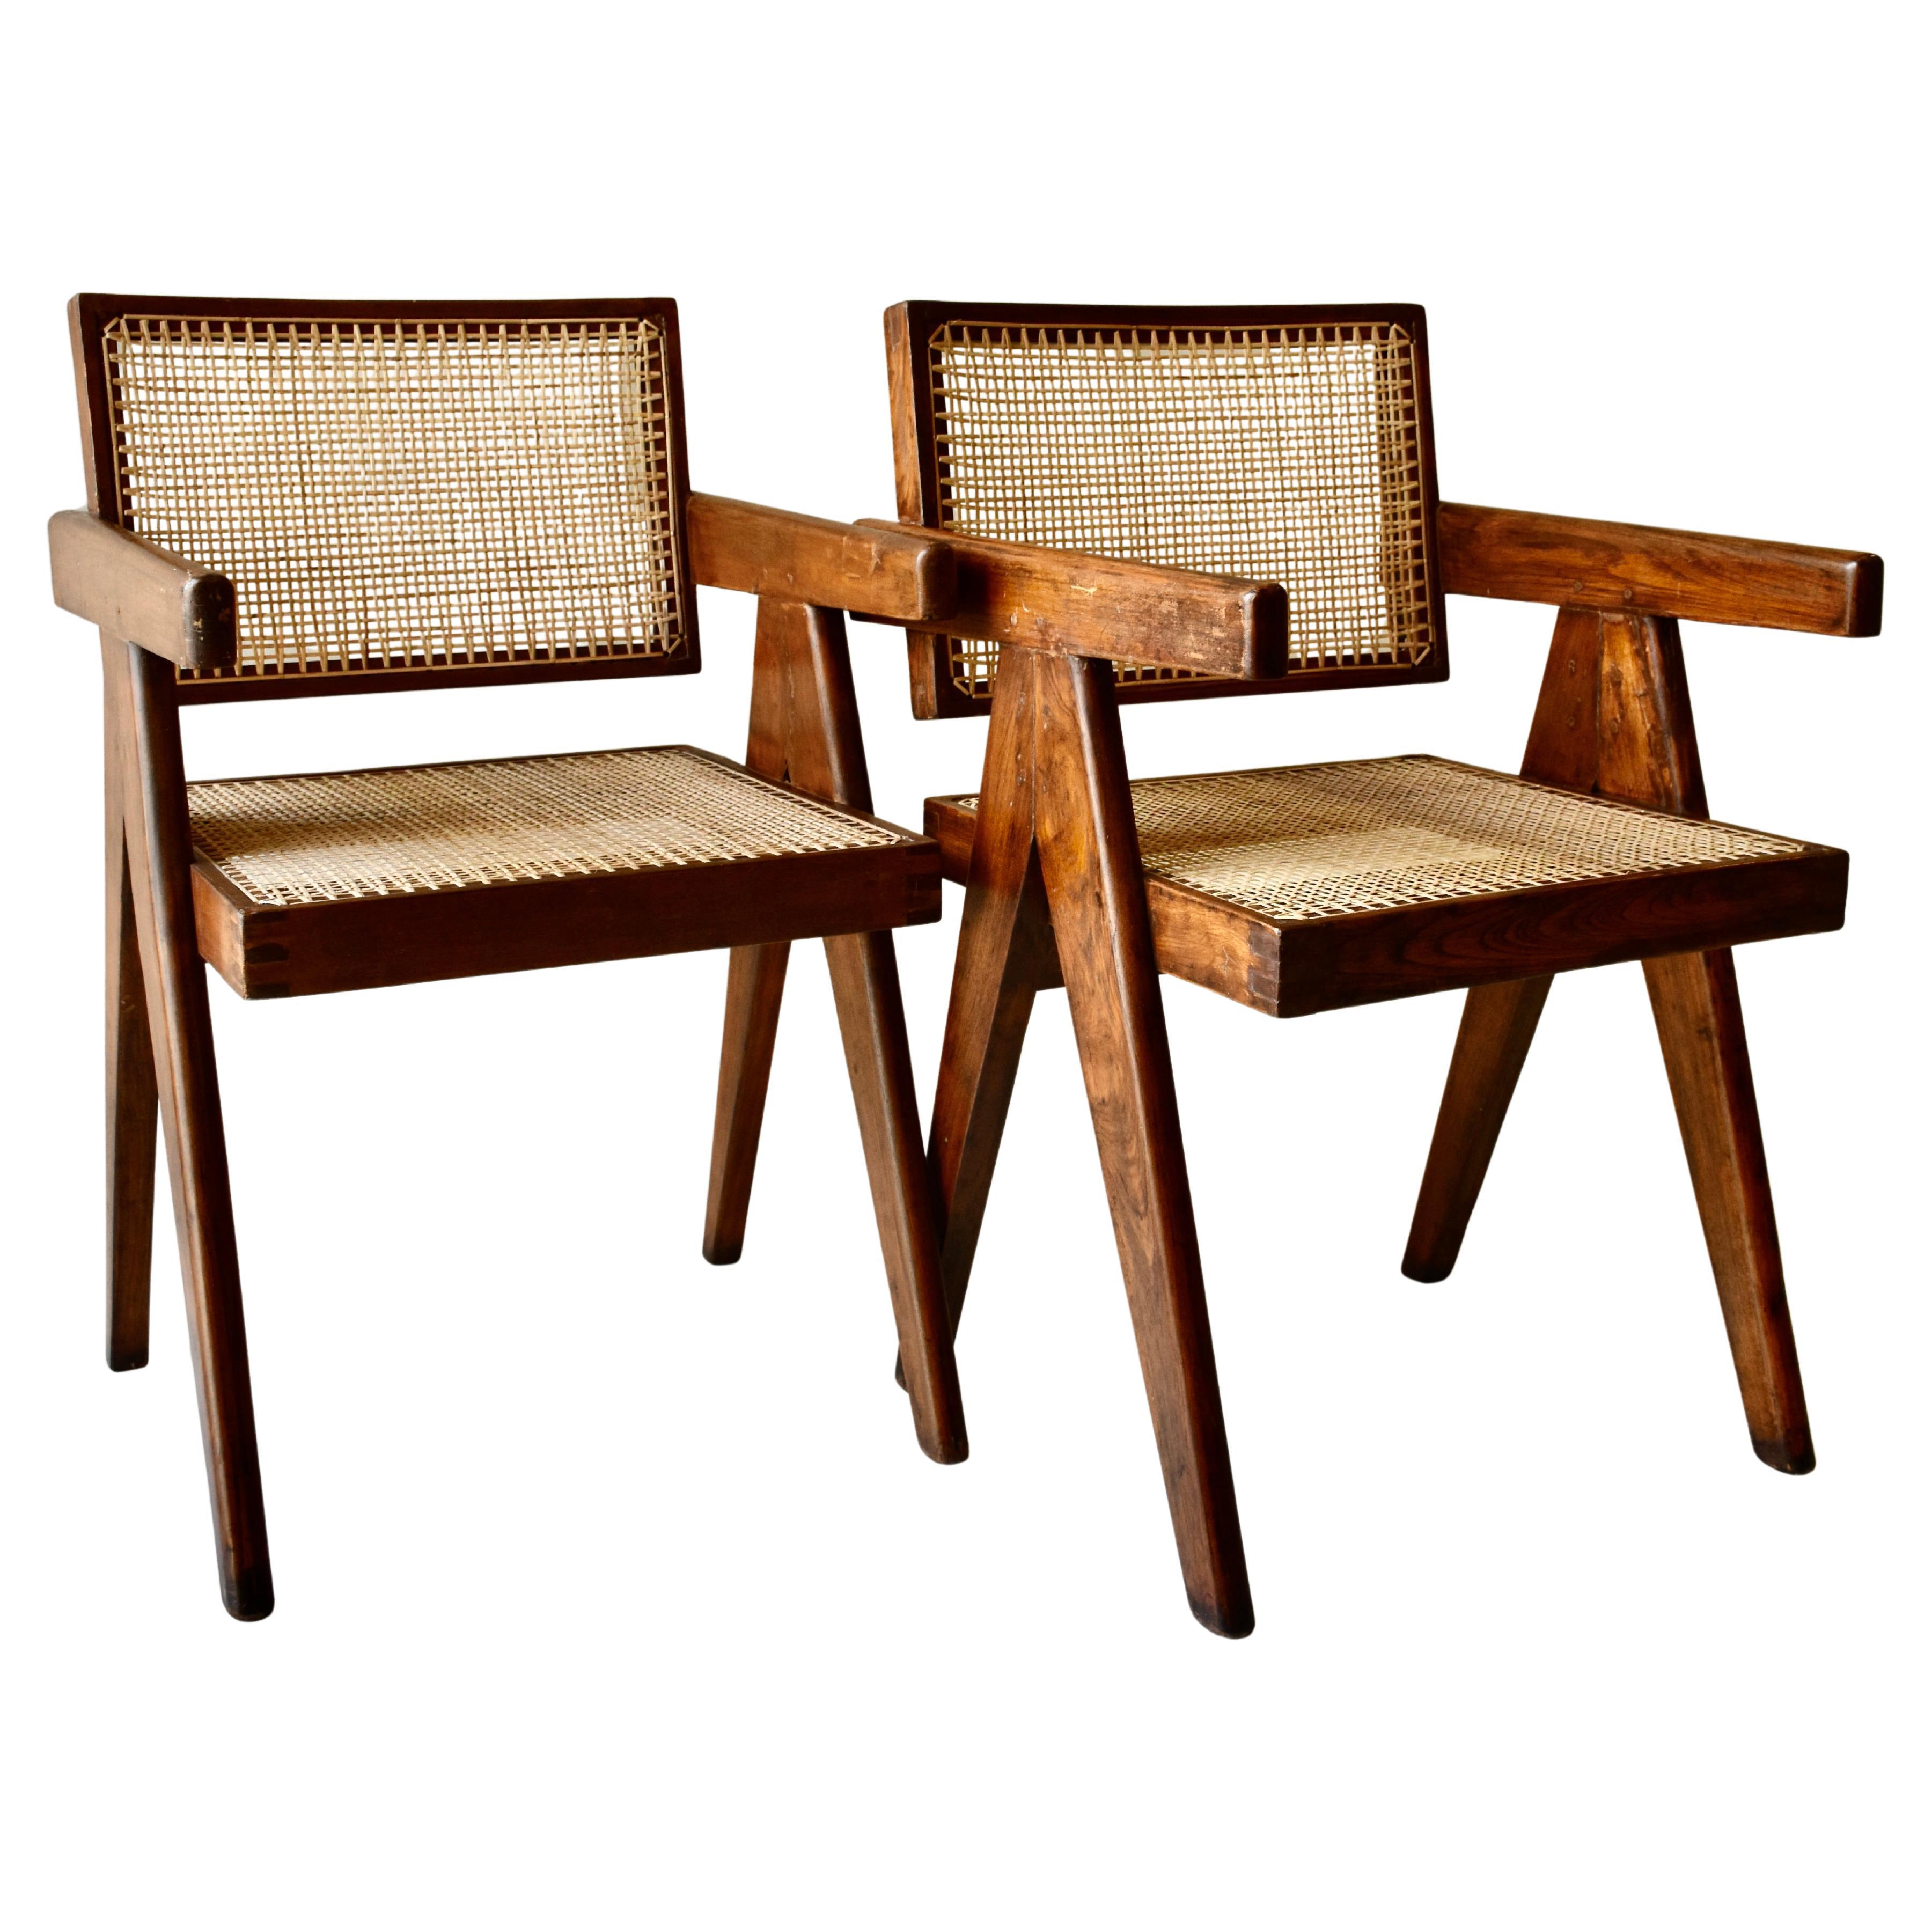 Mid-20th Century Pierre Jeanneret Set of 8 Office Cane Chairs Ca. 1955-1960 from Chandigarh For Sale